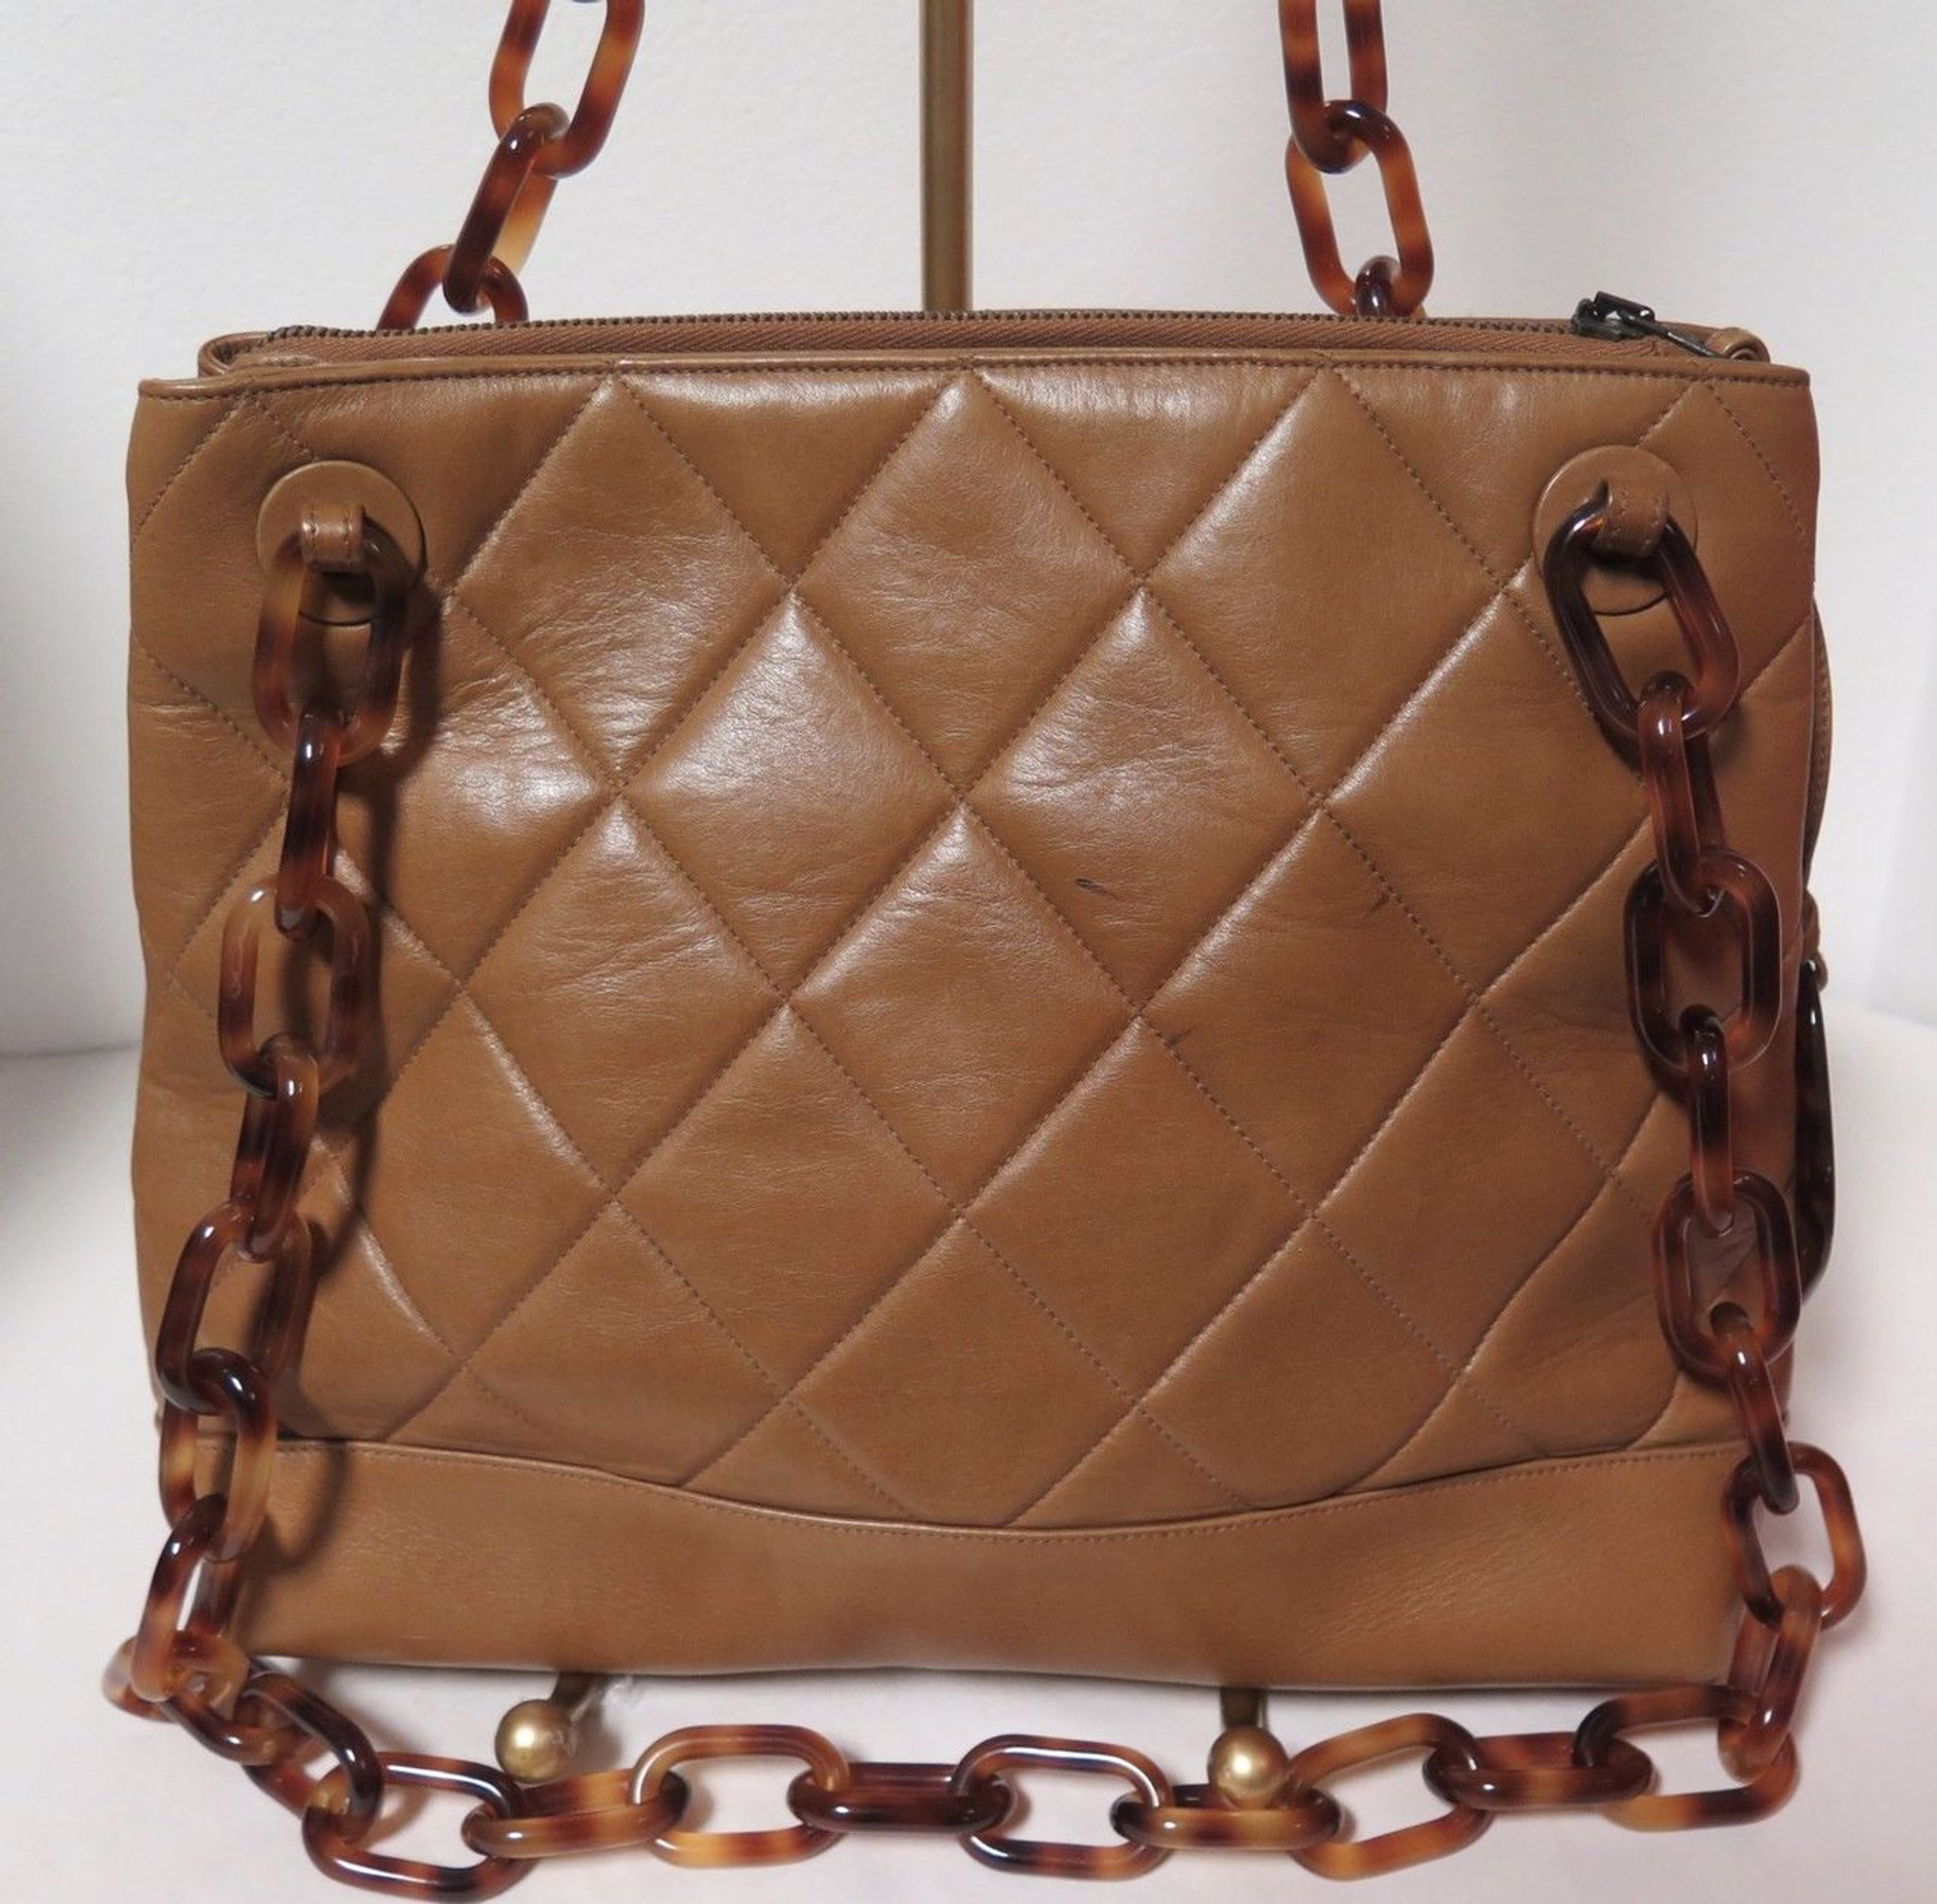 Vintage 1990s Chanel Tan Leather Tote With Tortoise Chain Link Handles